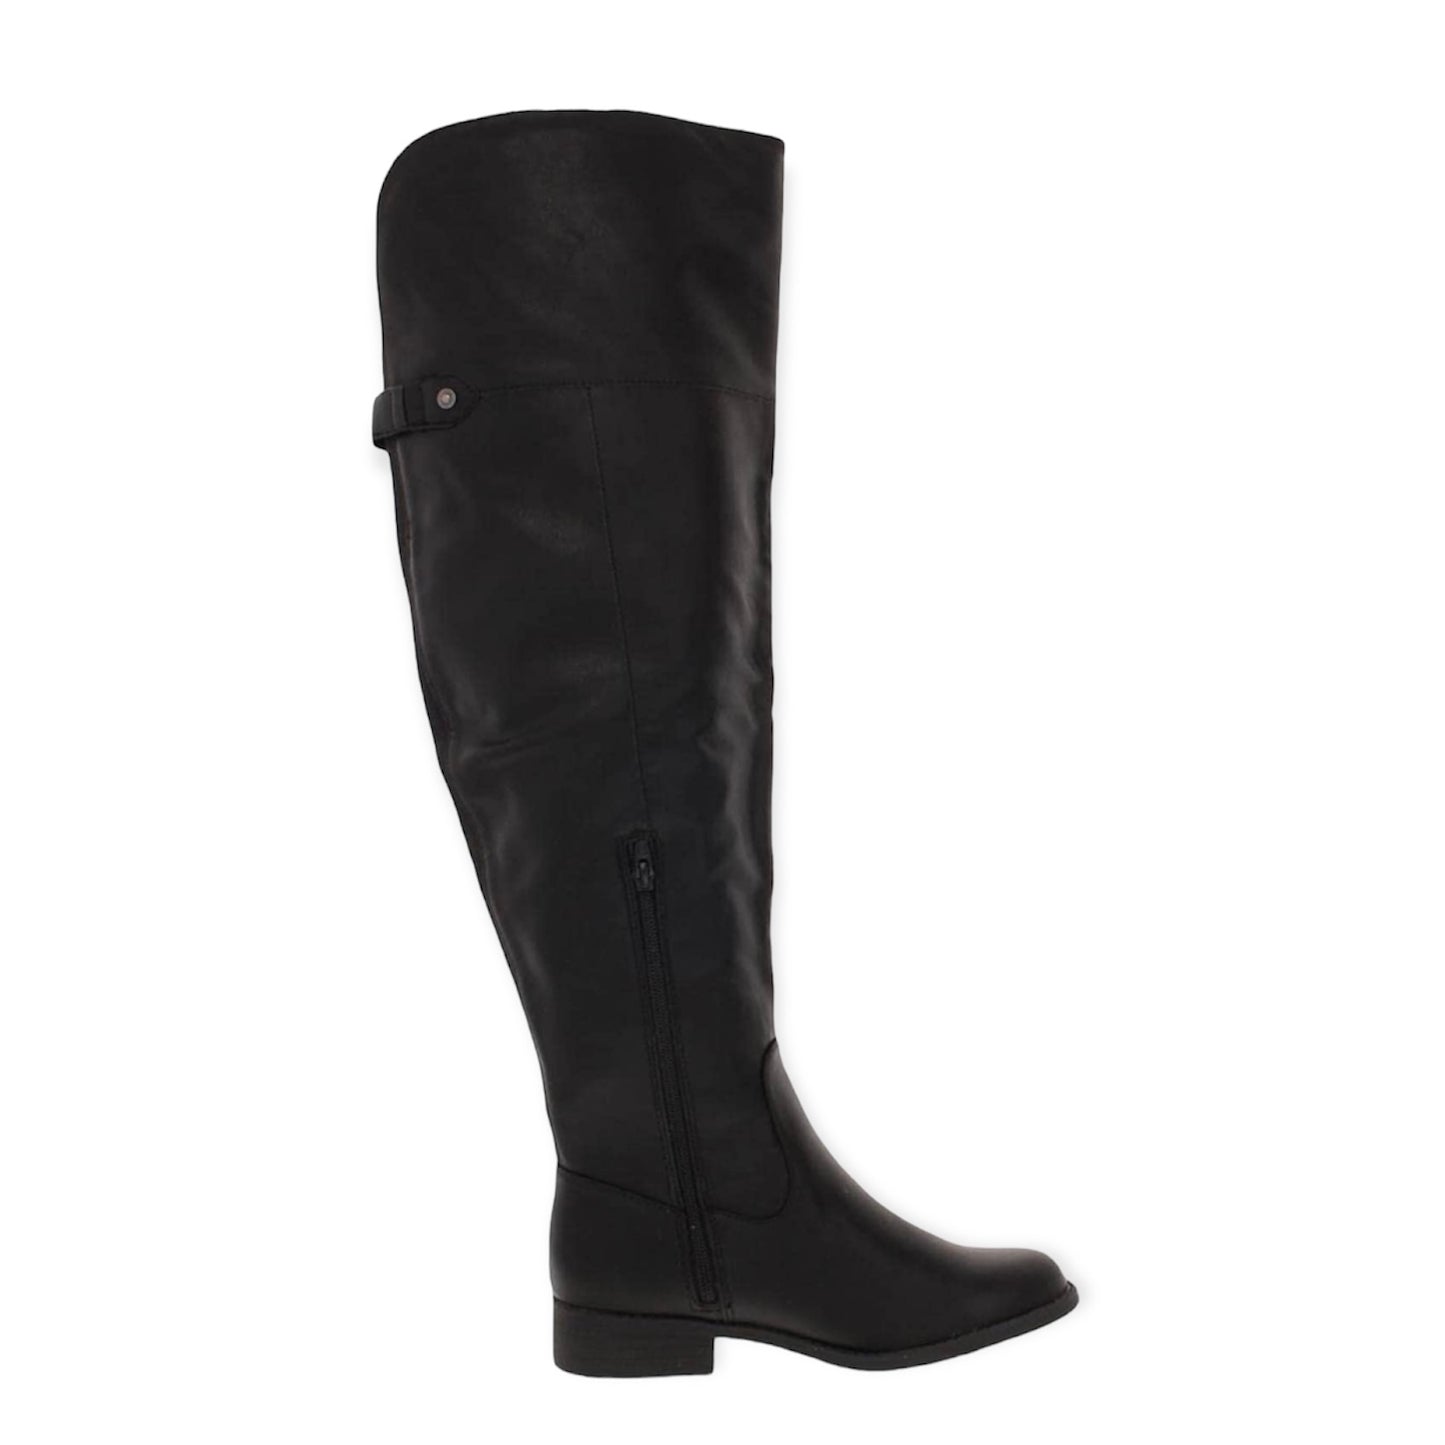 Allicce Black Micro Over-The-Knee Size 9M Round Toe Women's Boots